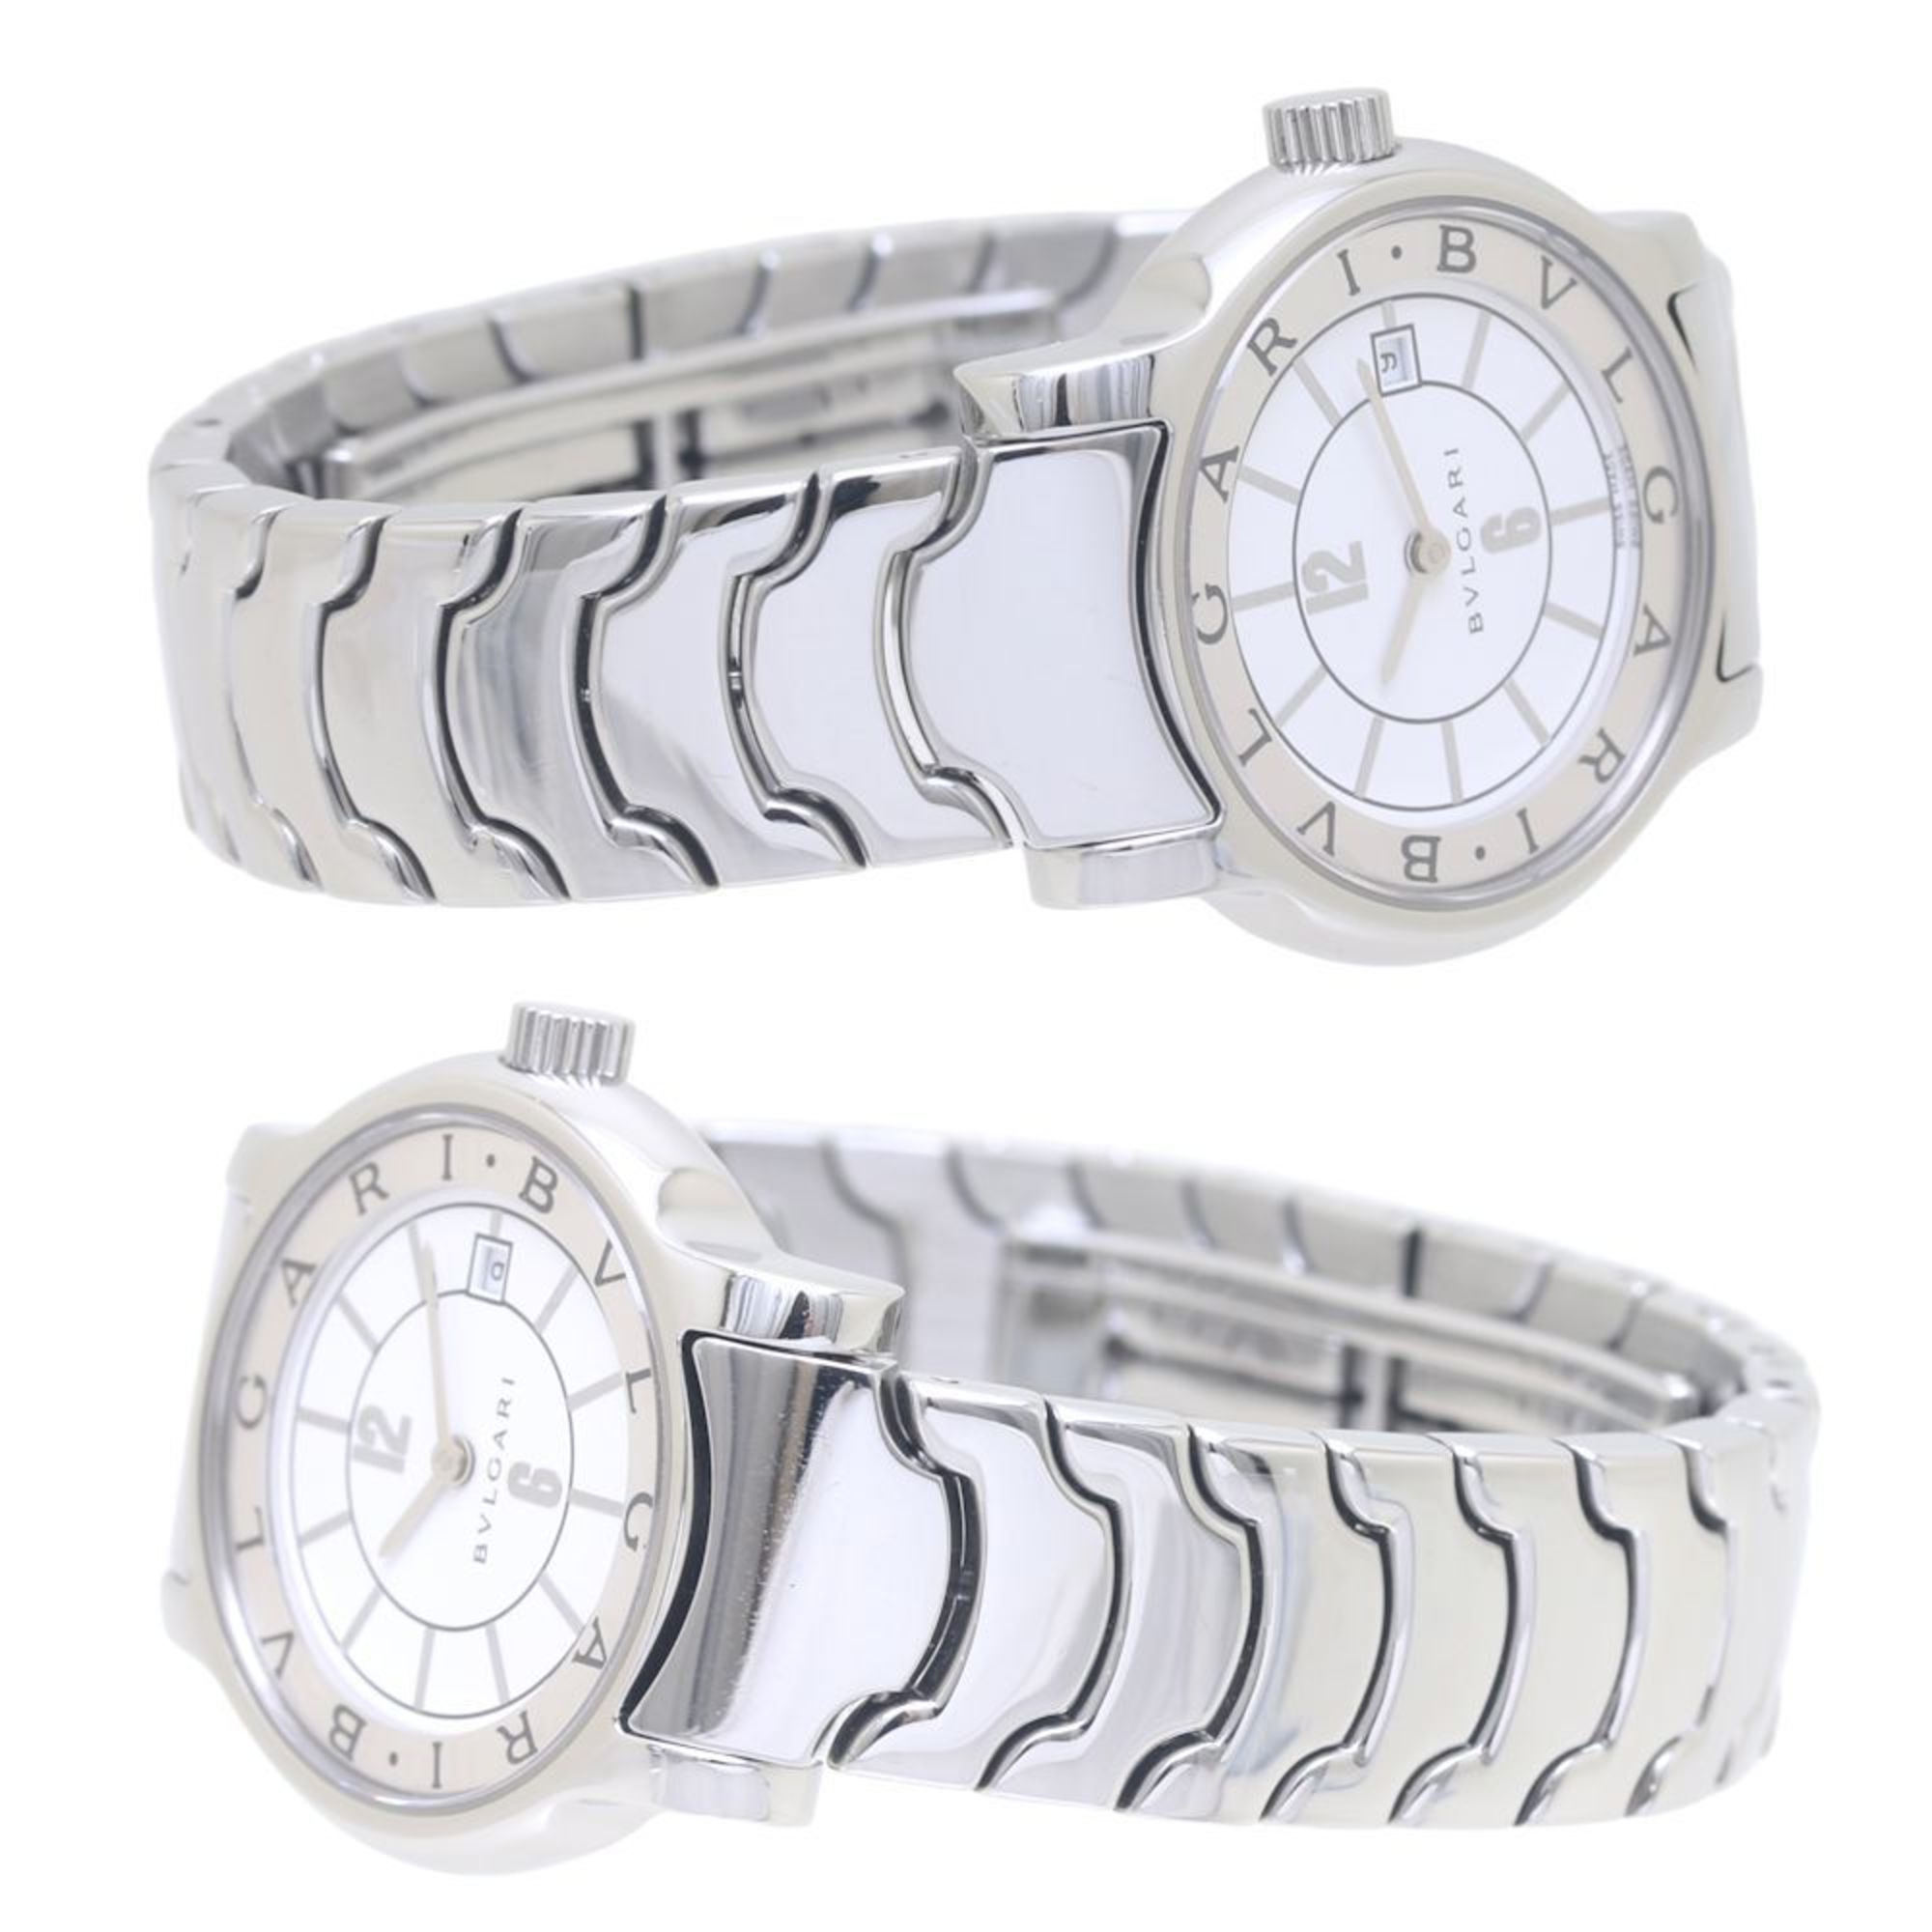 BVLGARI Solotempo ST29WSSD Old model, late crown stainless steel, ladies', 130127 watch